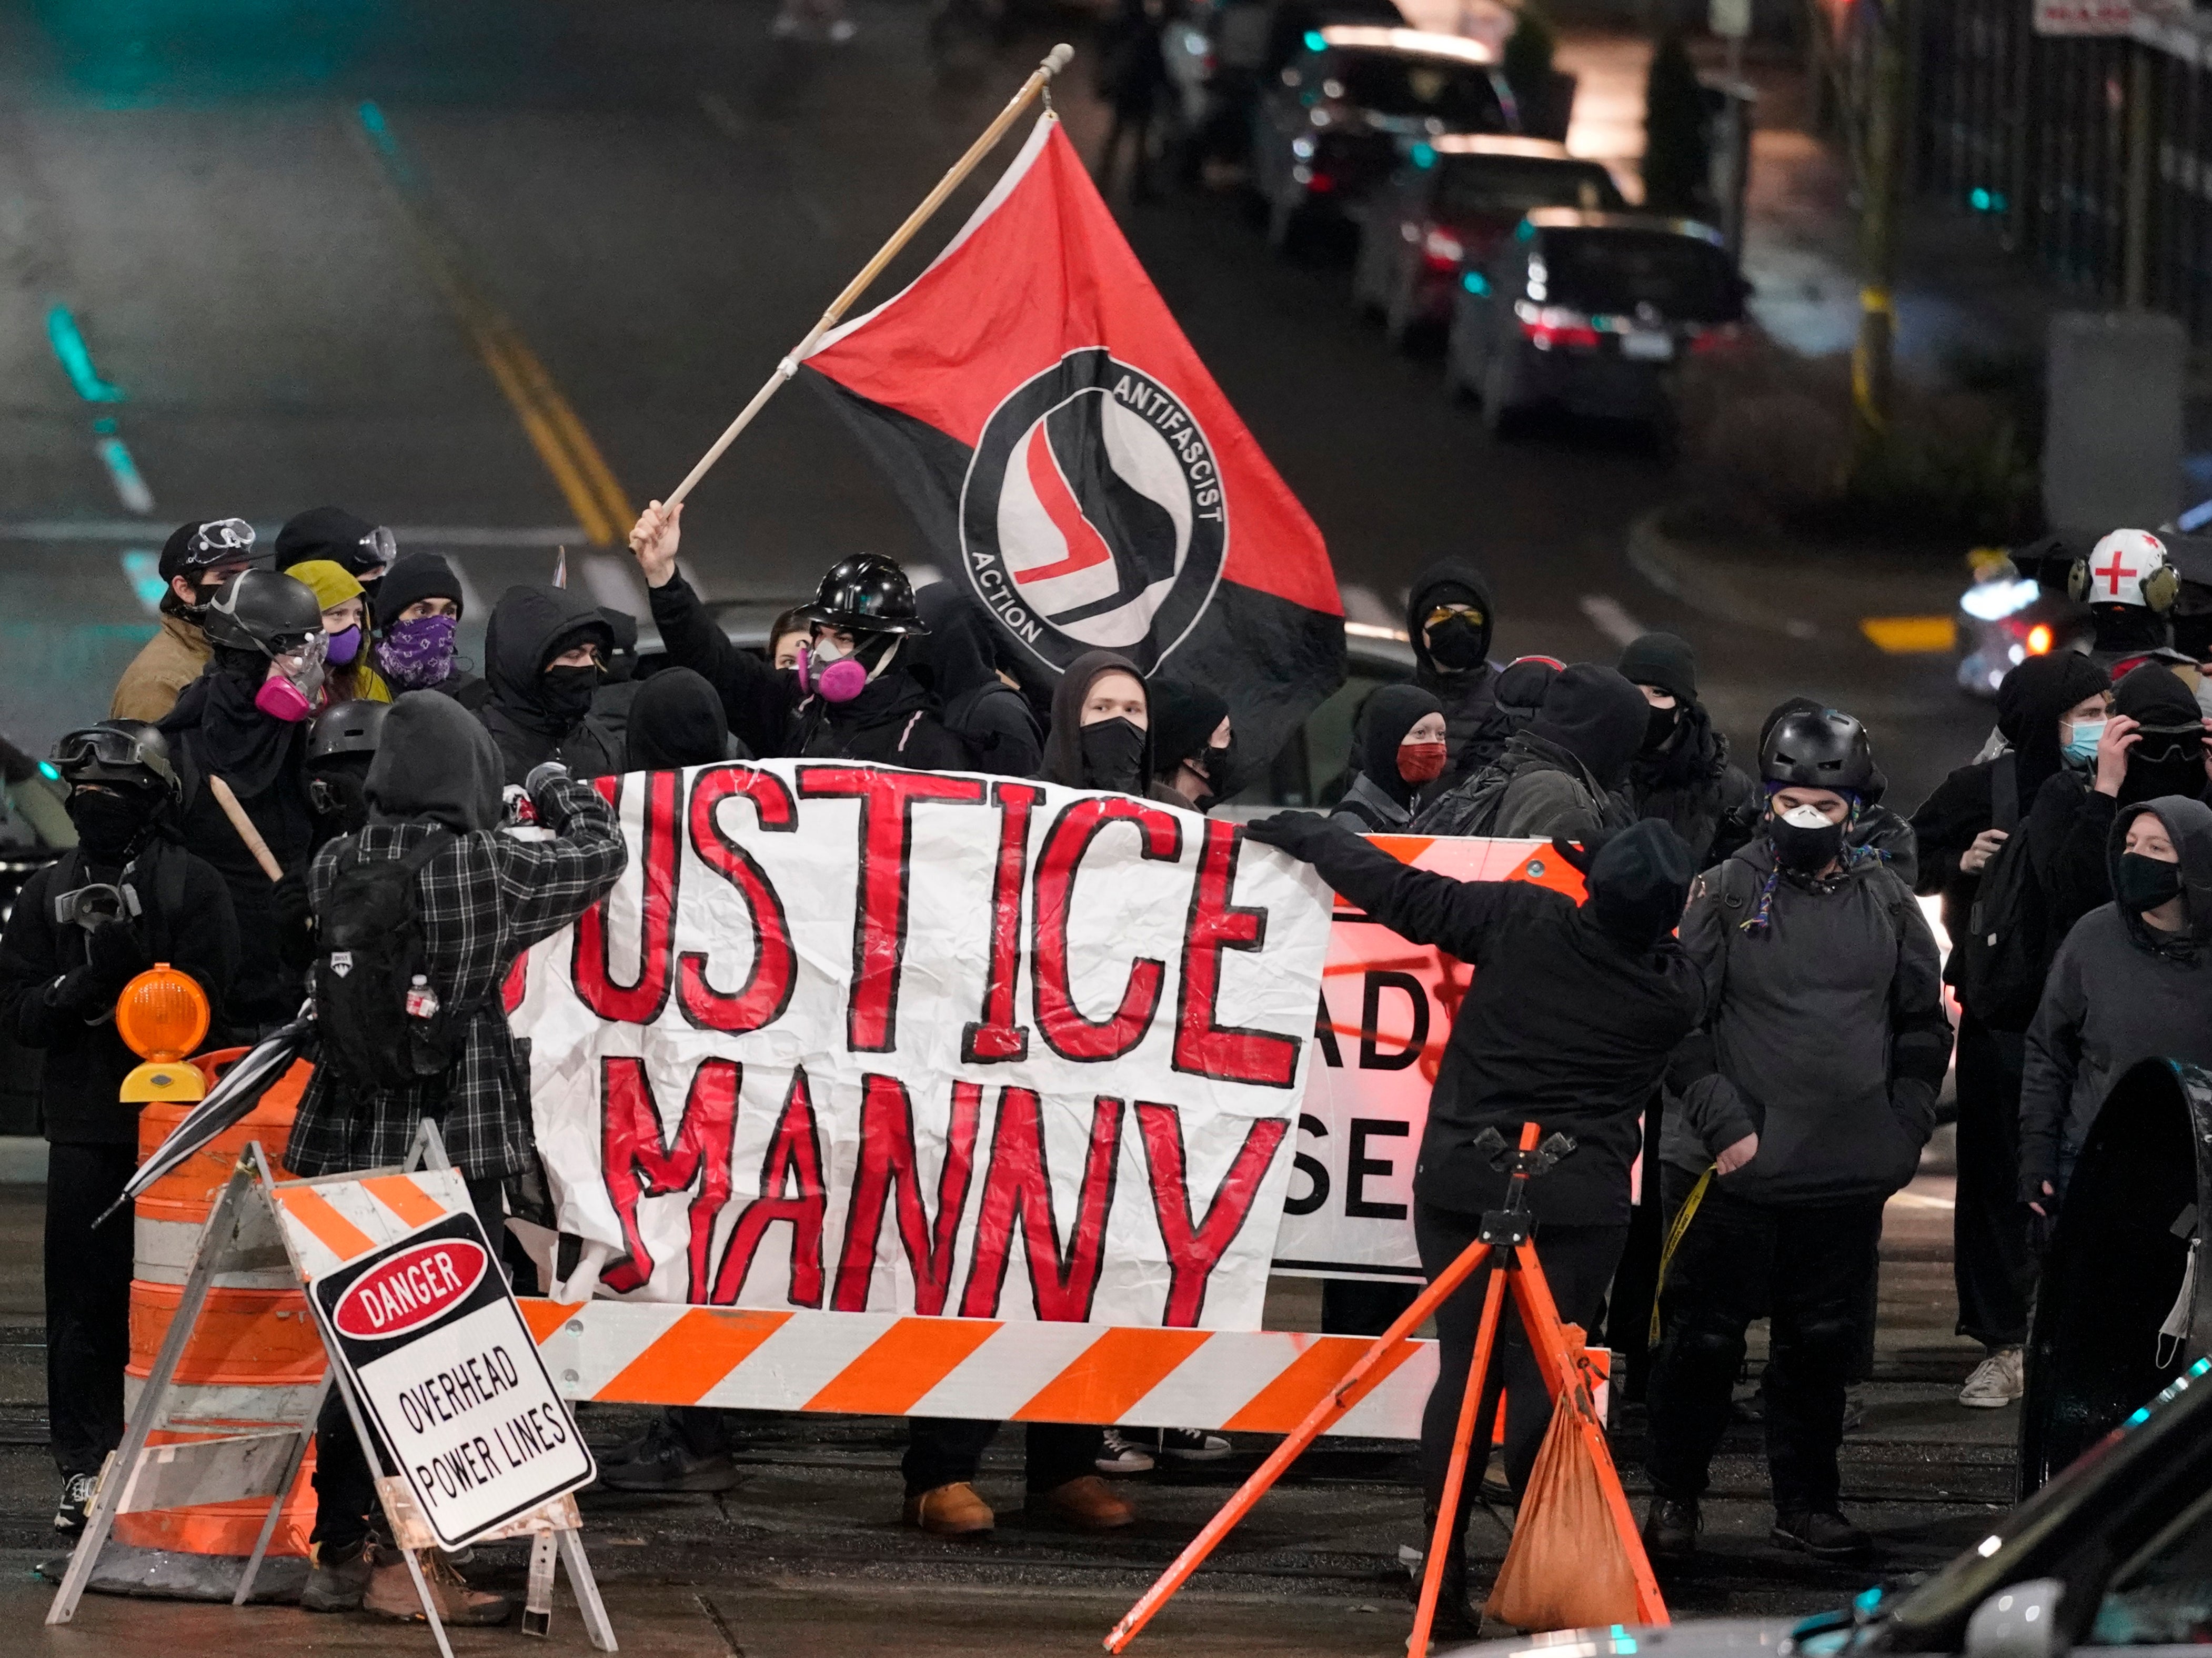 FILE - A protester carries a flag that reads "Antifascist Action" near a banner that reads "Justice for Manny," during a protest against police brutality in this Jan. 24, 2021 file photo in downtown Tacoma, Wash., south of Seattle. On Thursday, May 27, 2021, the Washington state attorney general filed criminal charges against three police officers in the death of Manuel Ellis, a Black man who died after telling the Tacoma officers who were restraining him he couldn't breathe. (AP Photo/Ted S. Warren, File)